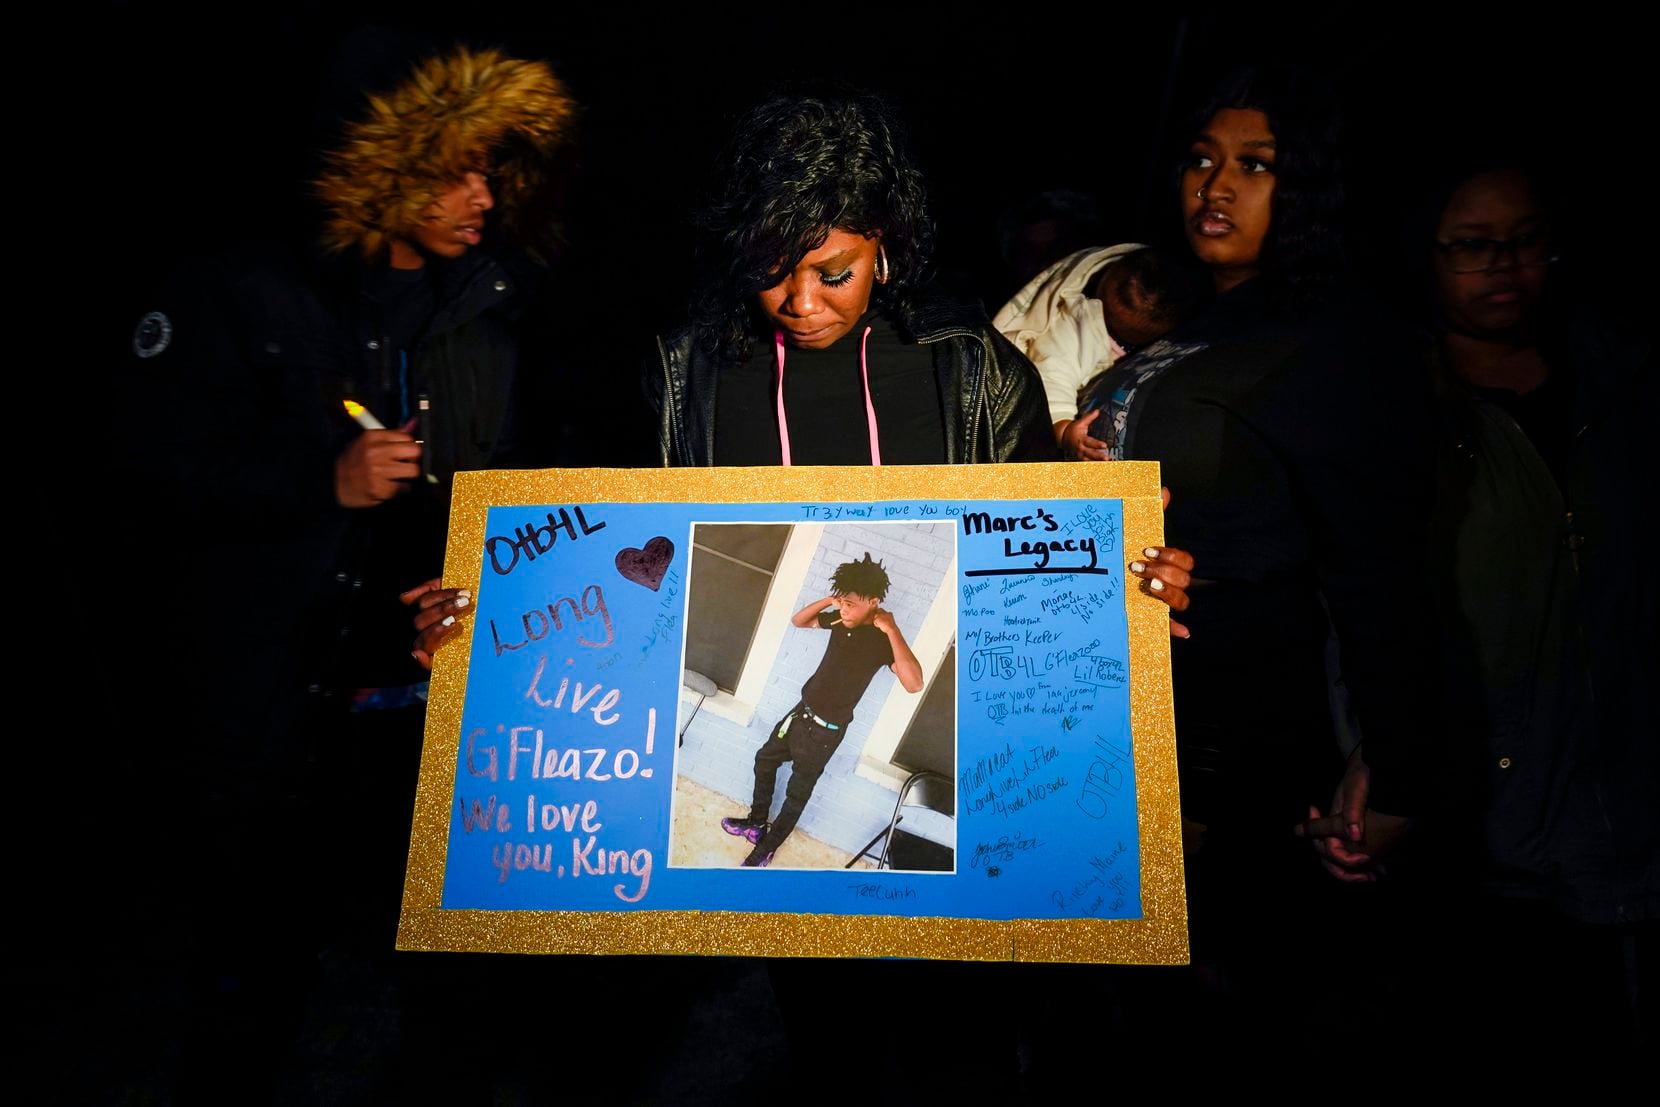 Monique Mitchell holds a photograph of her son Marc "Flea" Strickland, an 18-year-old victim of a shooting at Dallas ISD basketball game, during a vigil at Bushman Park on Sunday, Jan. 19, 2020.